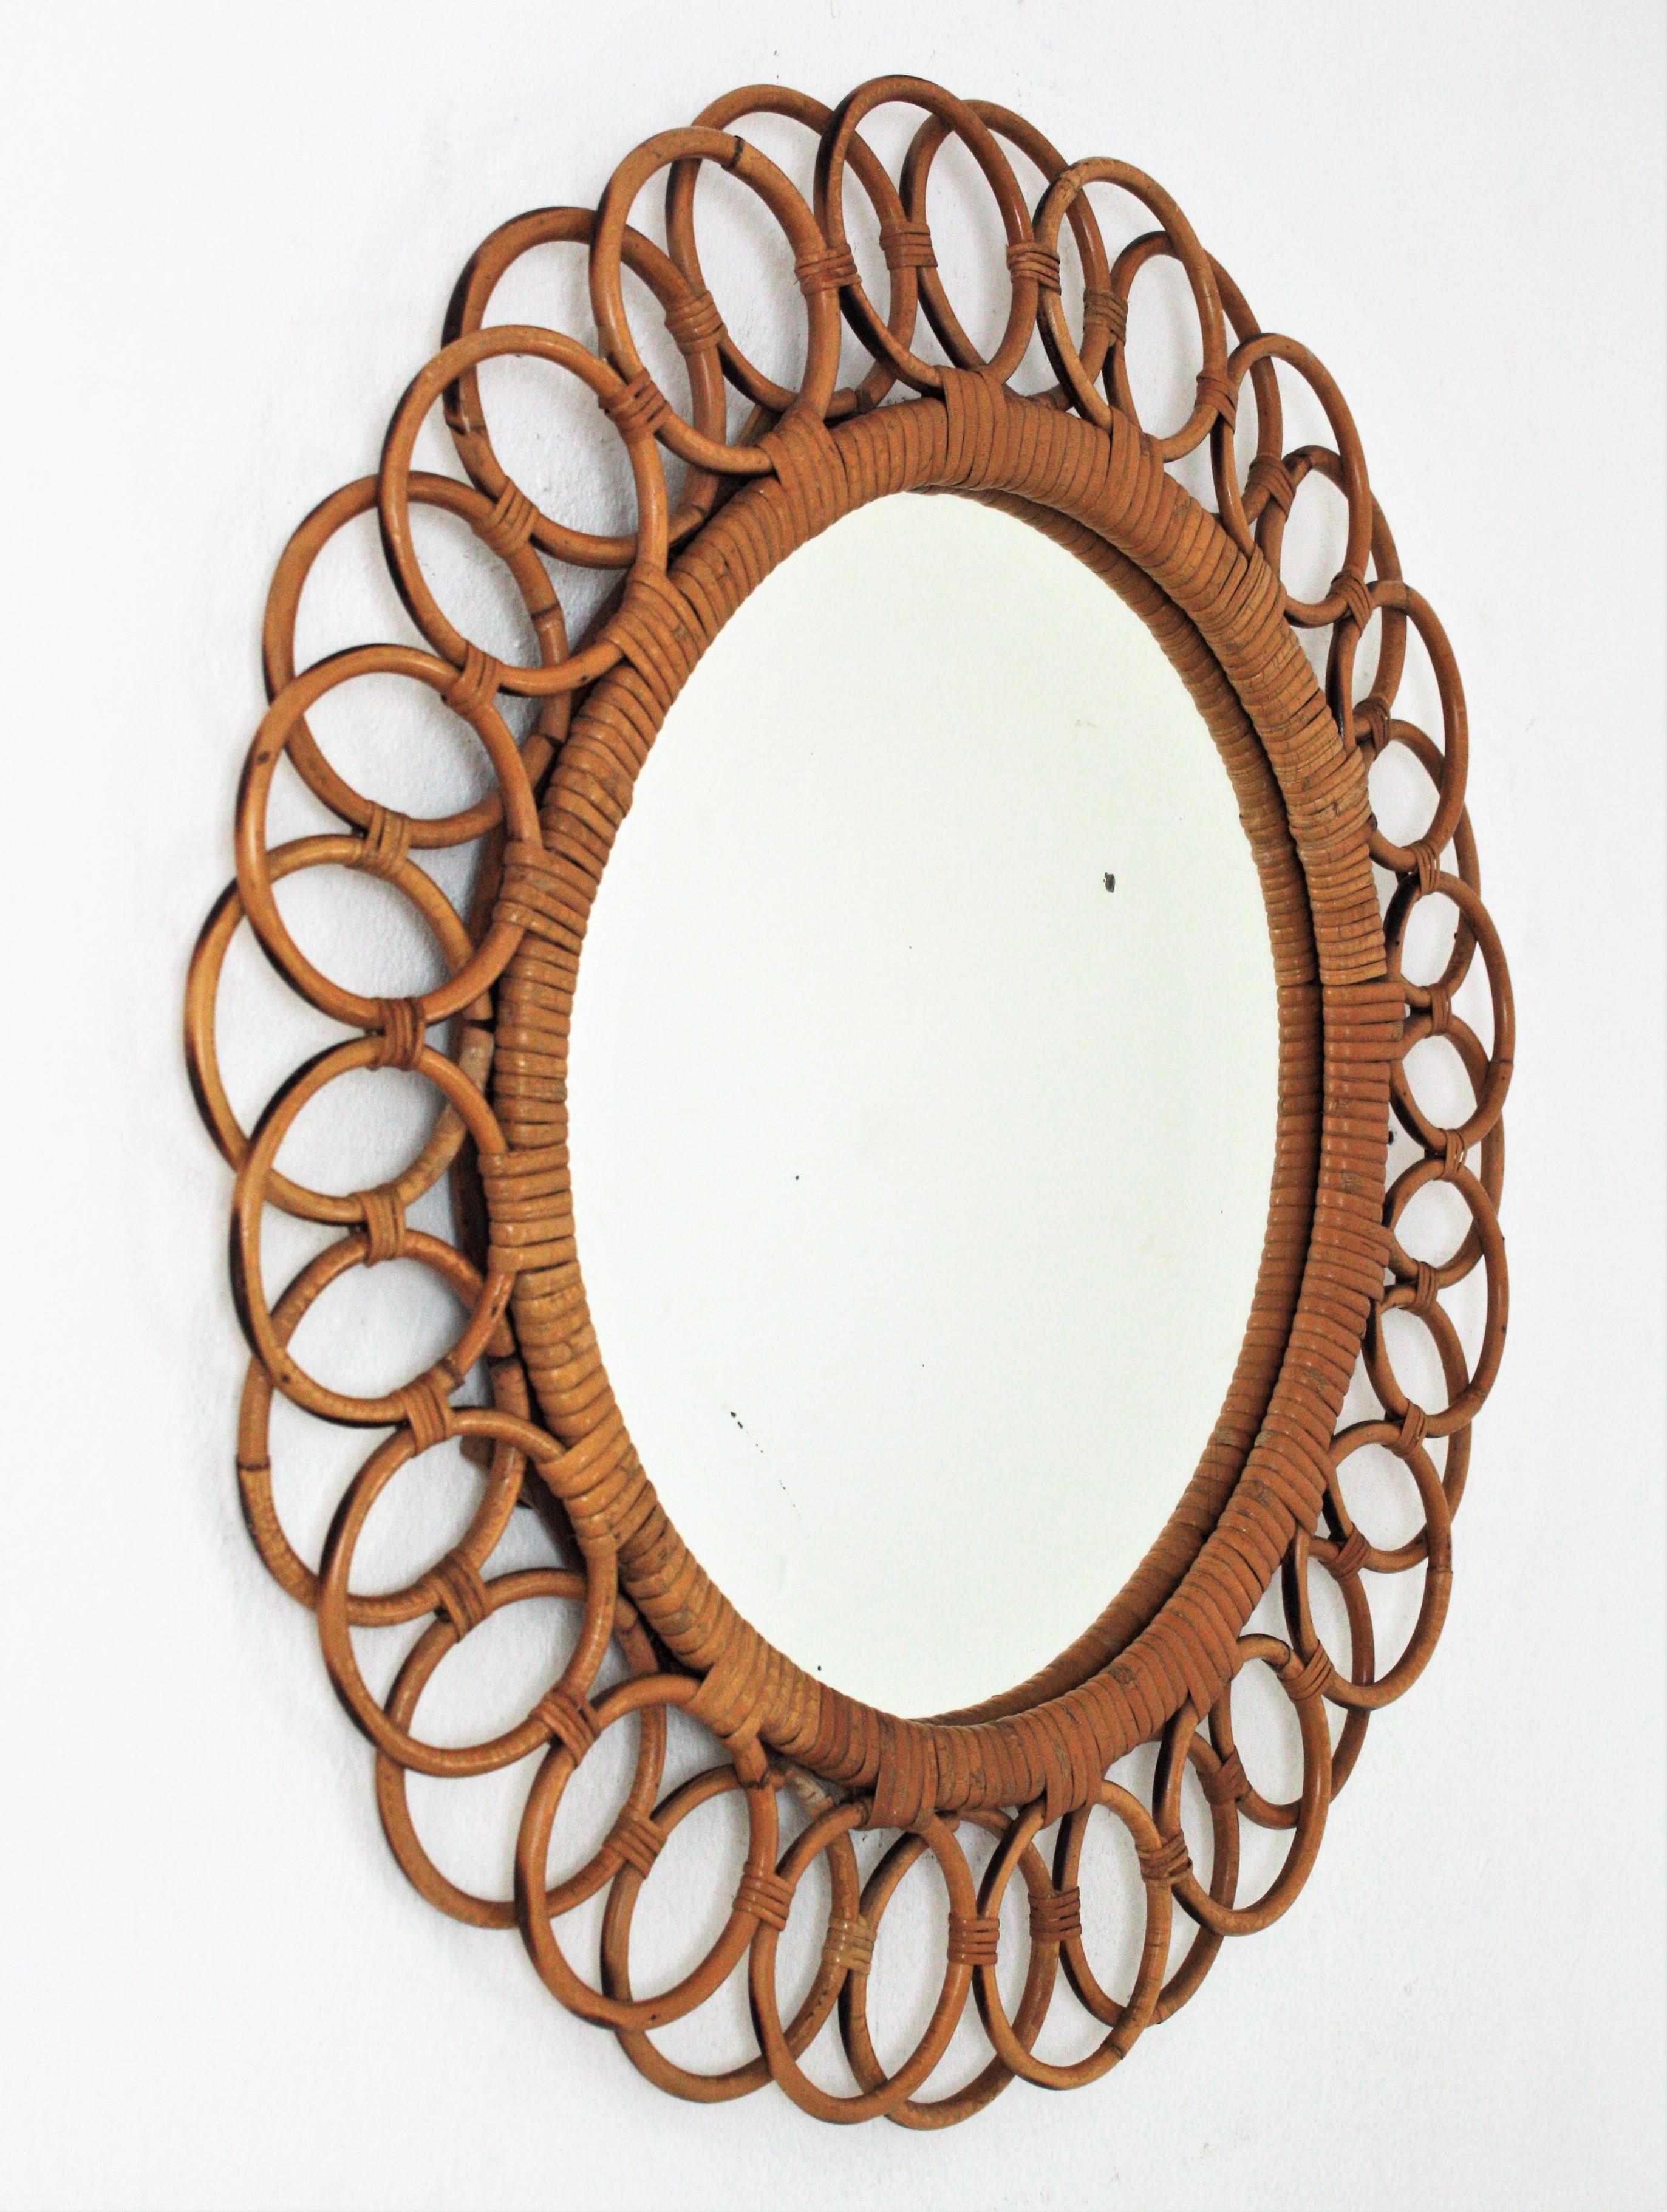 Hand-Crafted Spanish Rattan Round Mirror with Rings Frame For Sale